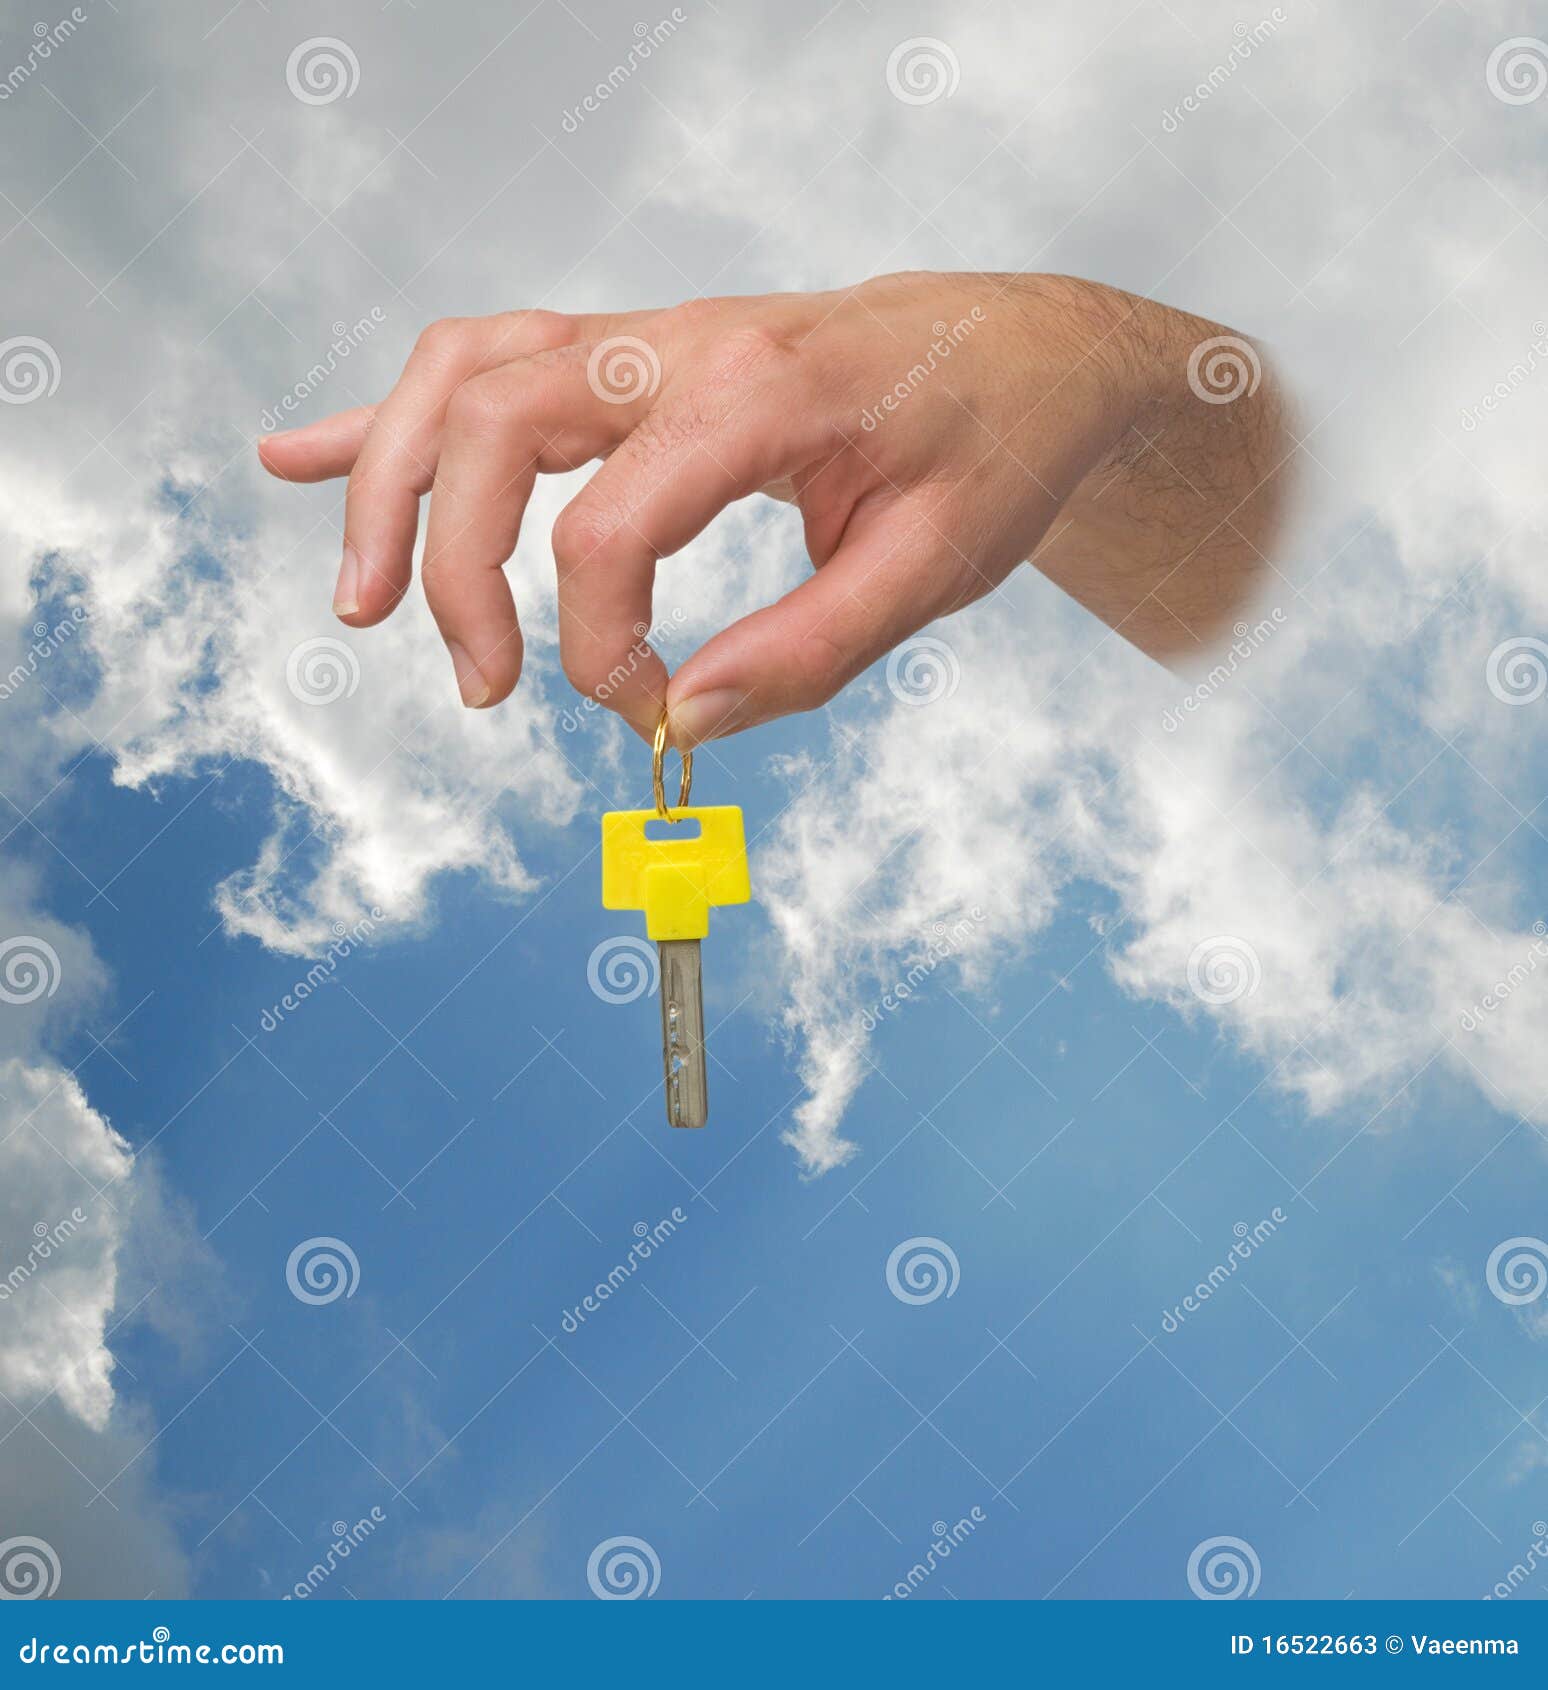 Gift of key stock image. Image of digit, finger, cloudy - 16522663